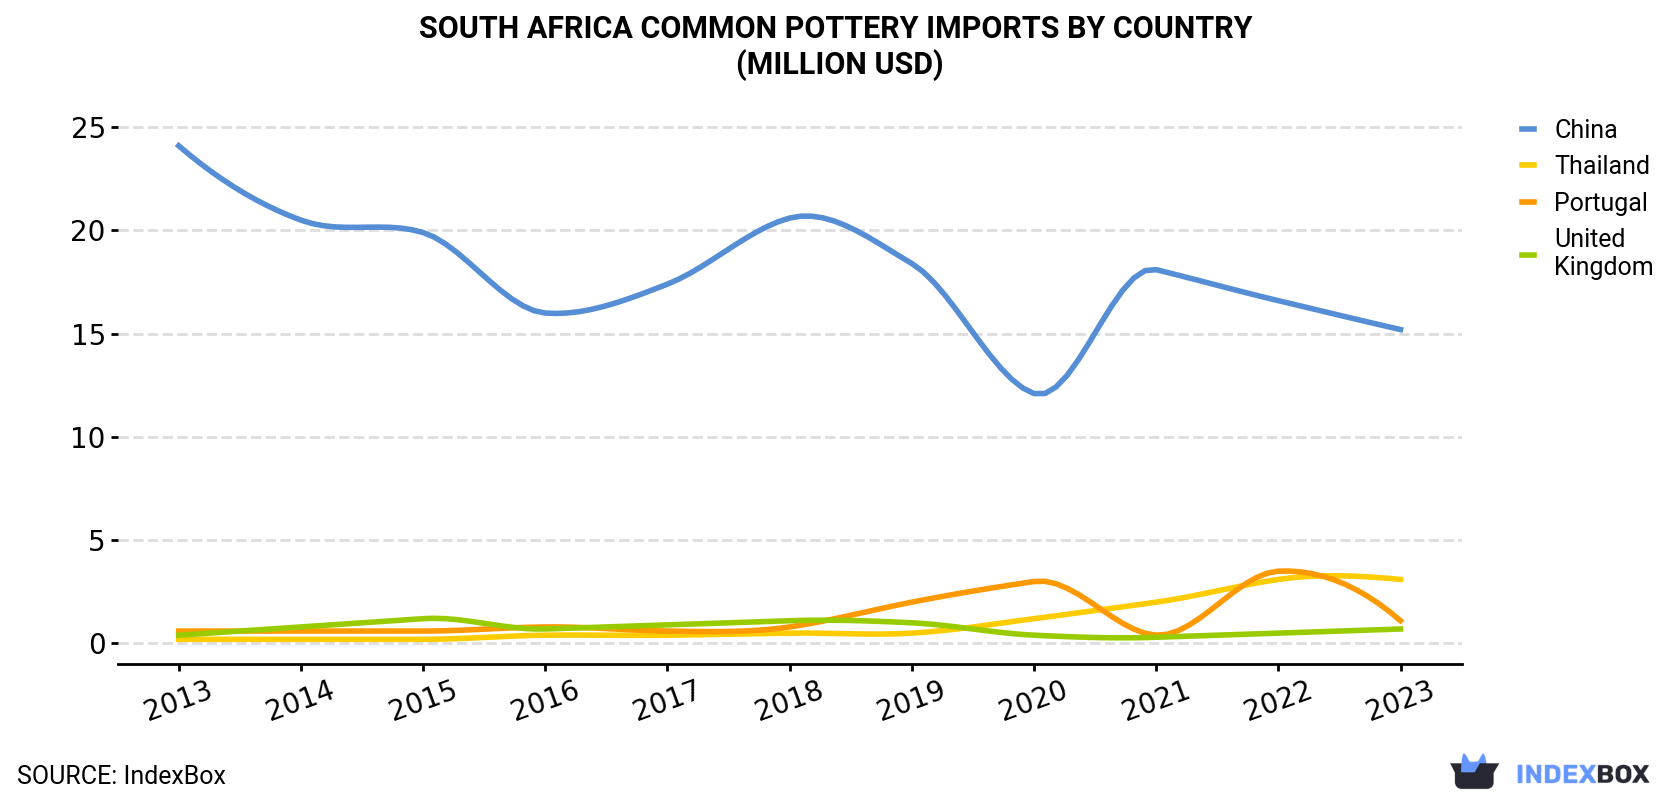 South Africa Common Pottery Imports By Country (Million USD)